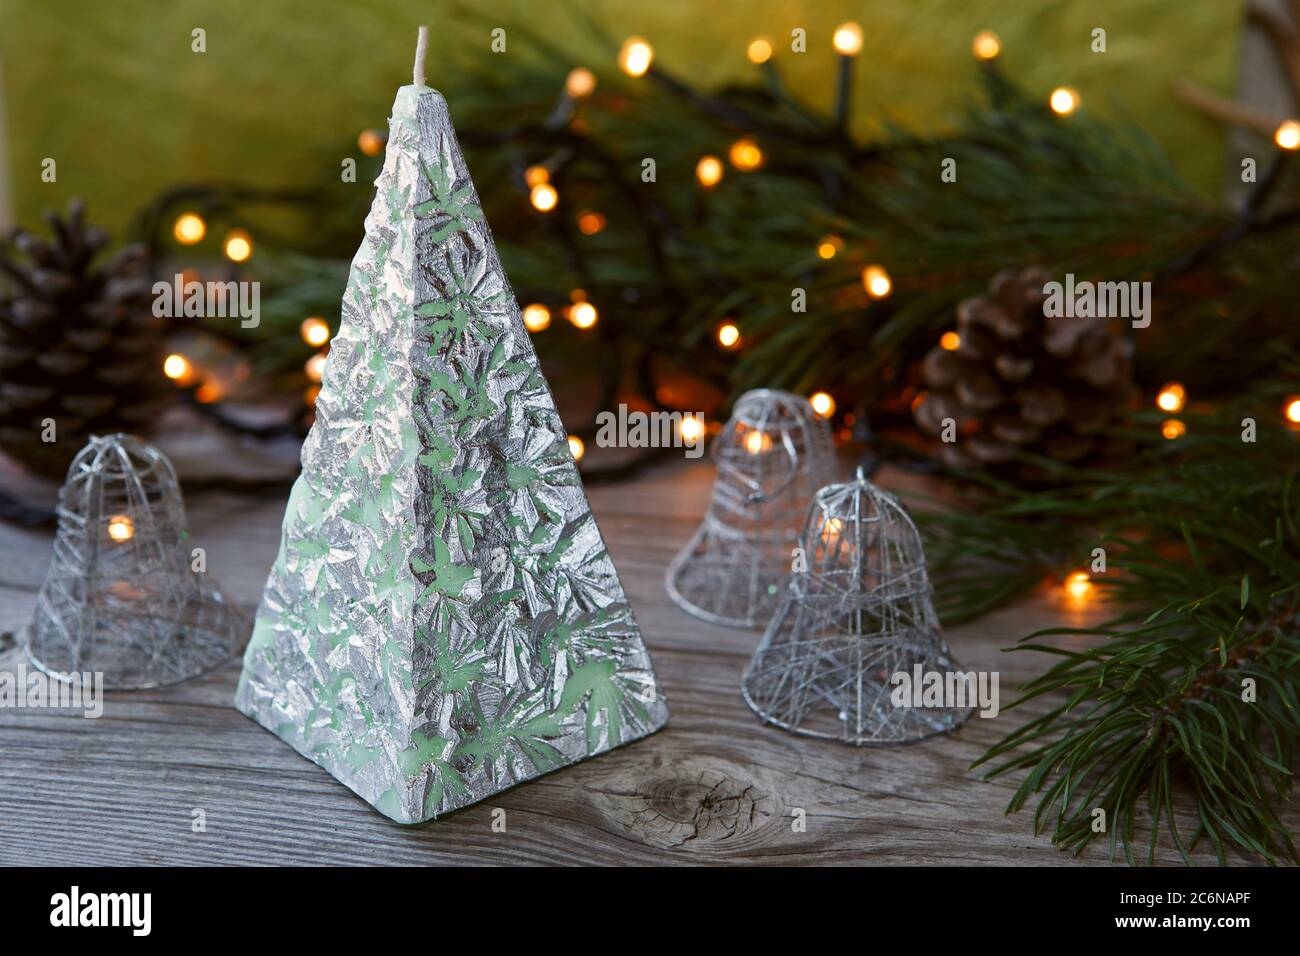 Decorative Handmade candle in the shape of a pyramid Stock Photo